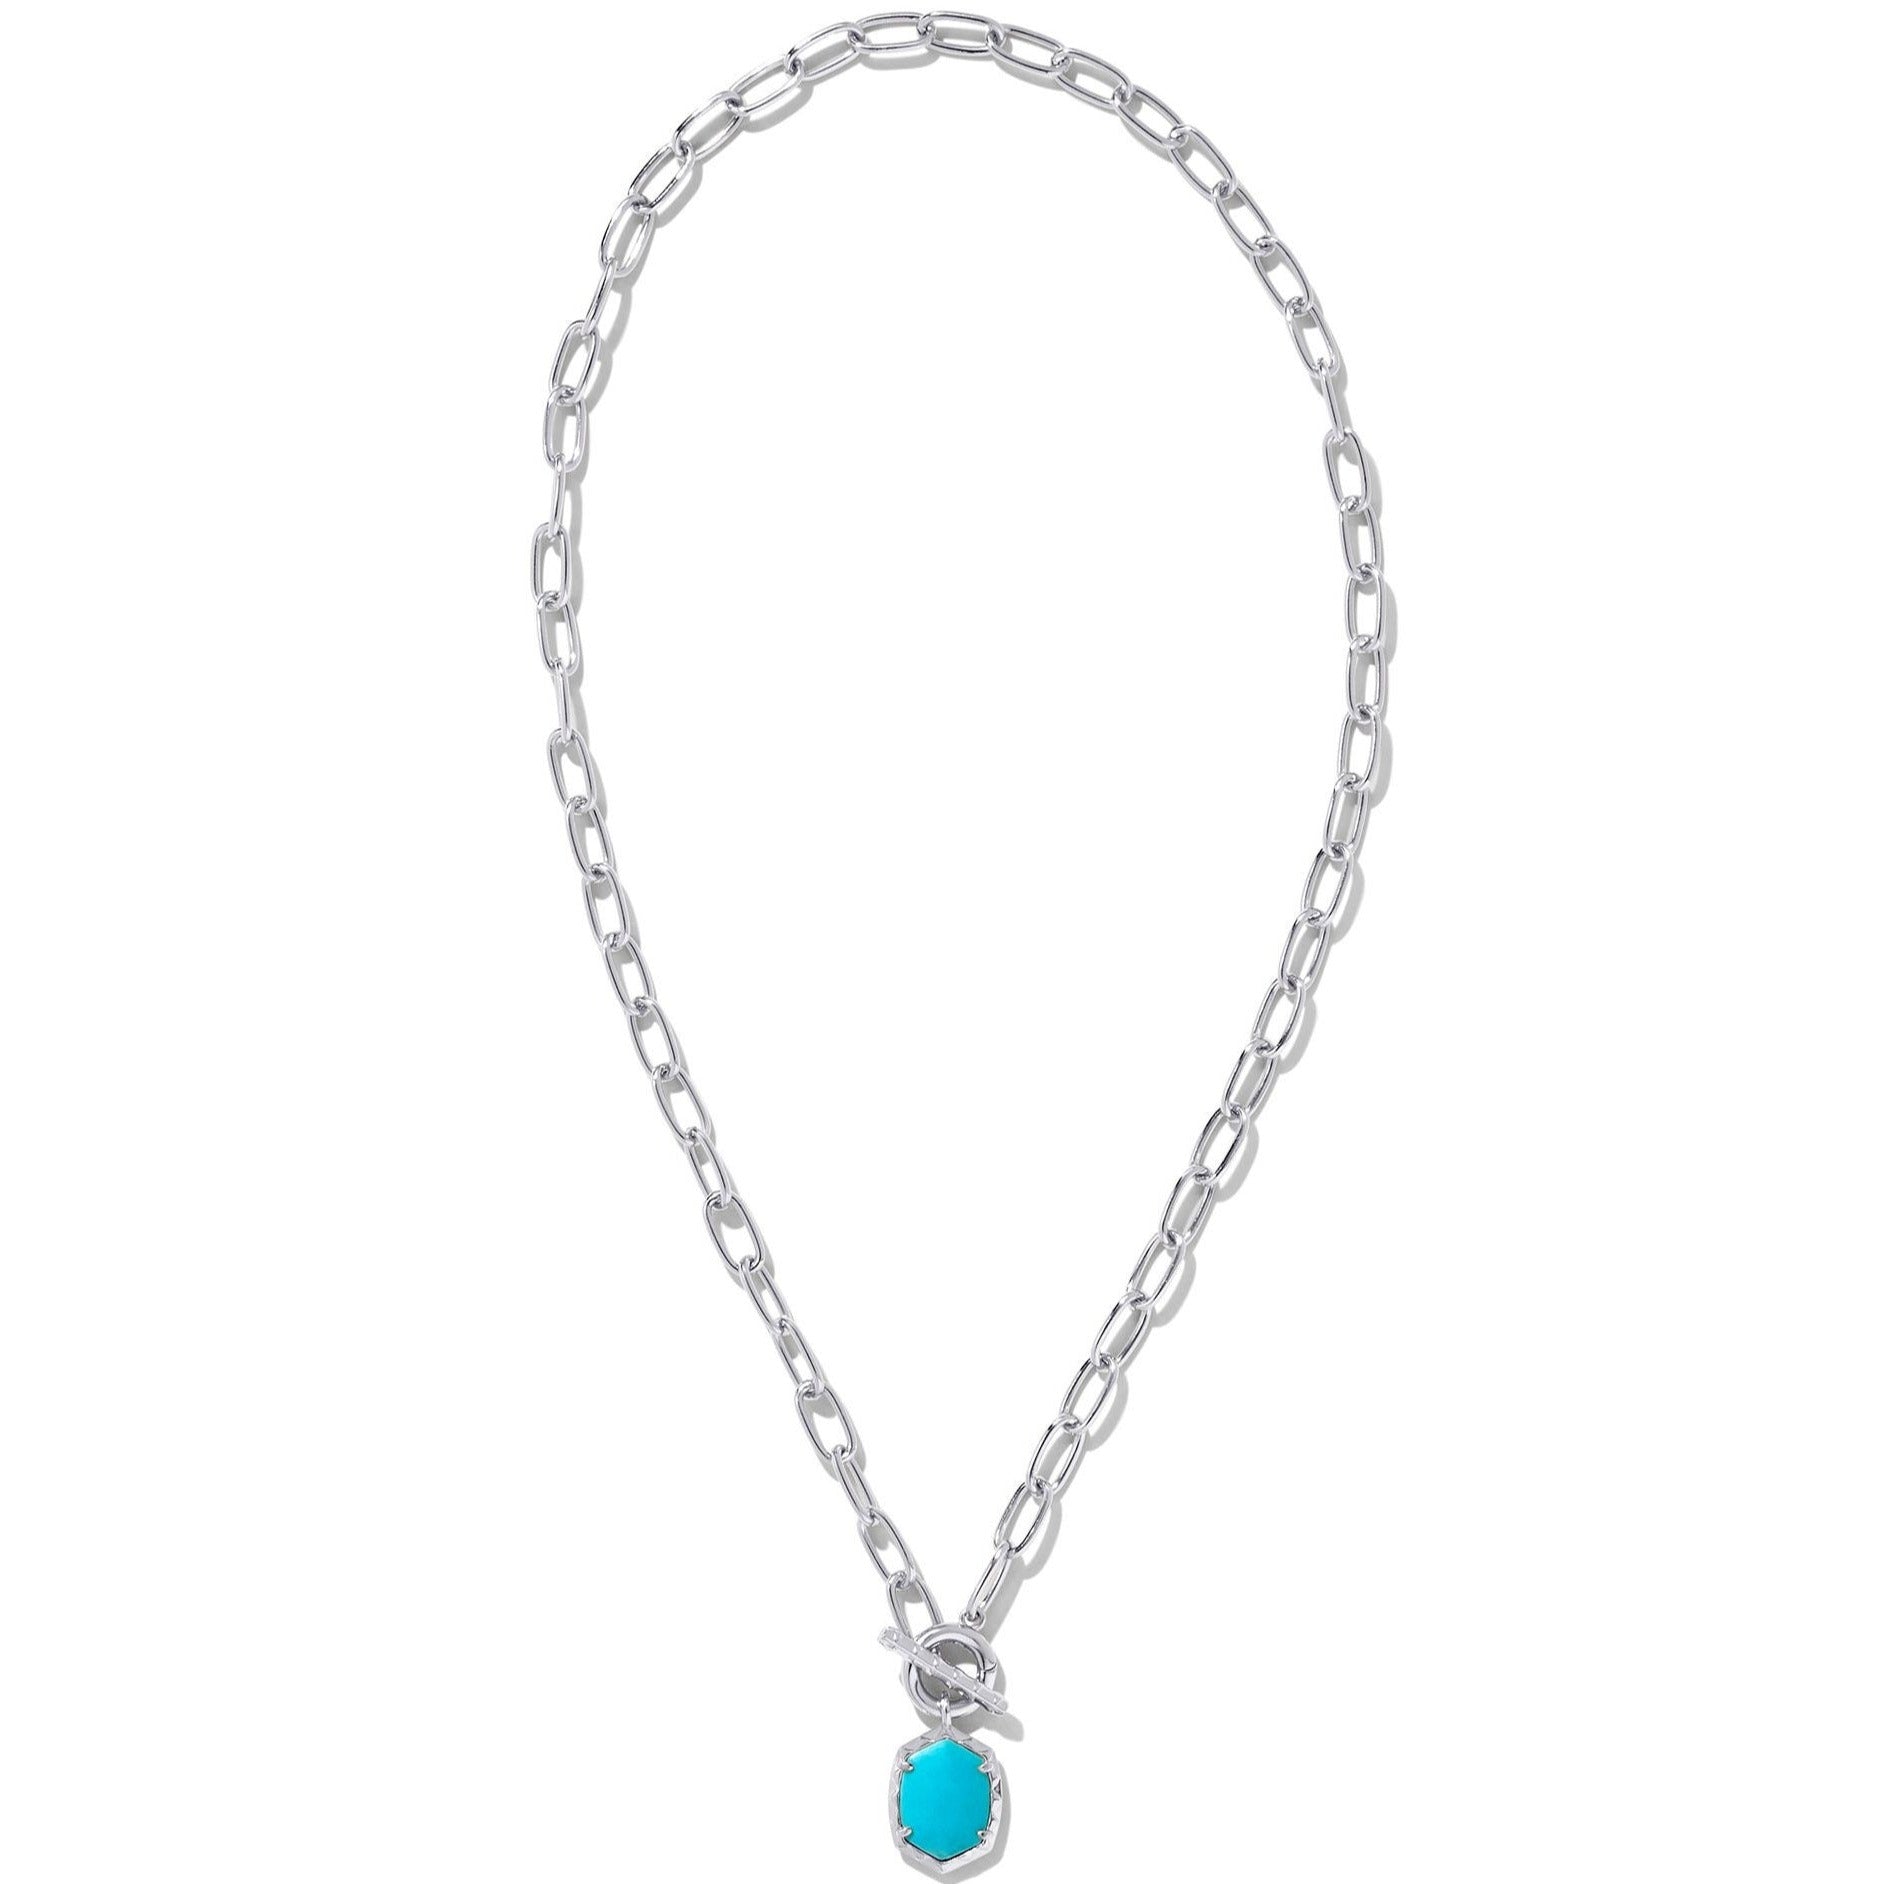 Kendra Scott | Daphne Silver Link and Chain Necklace in Variegated Turquoise Magnesite - Giddy Up Glamour Boutique